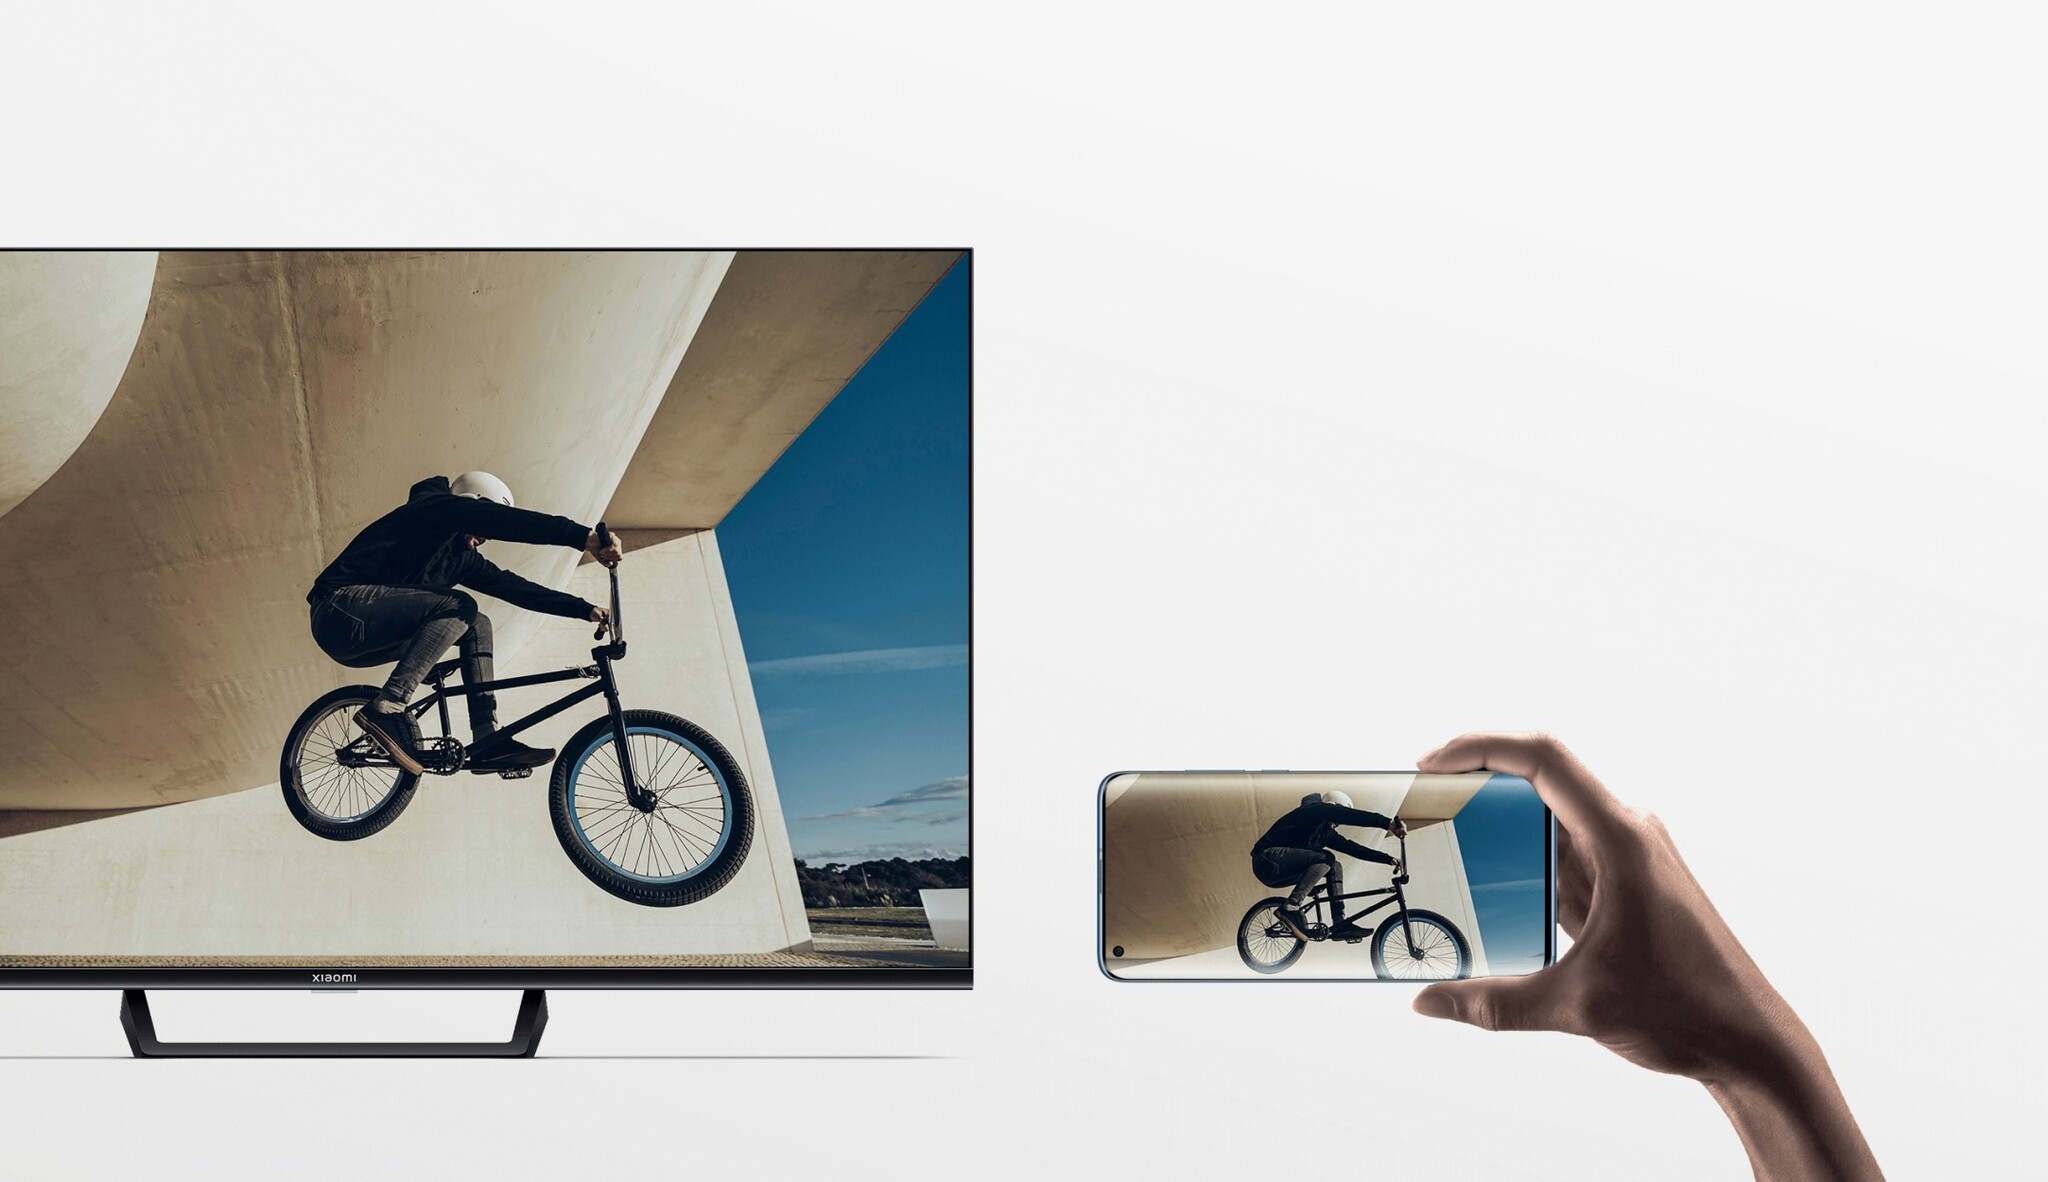 Xiaomi TV A2 (43, 4K, HDR): Price, specs and best deals